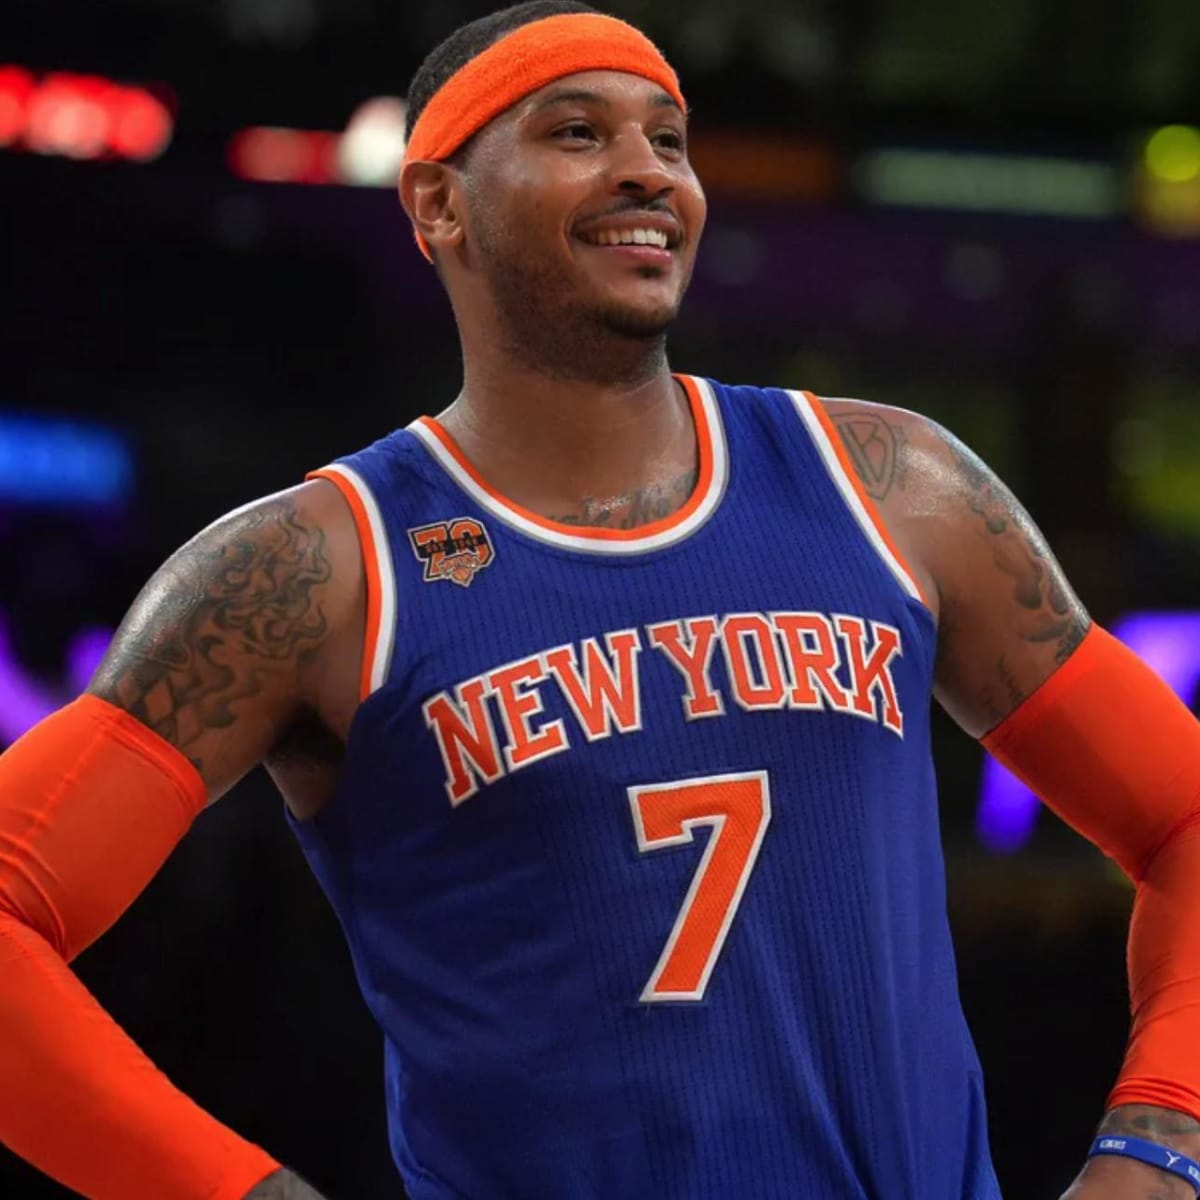 Report: Carmelo Anthony has interest in returning to New York